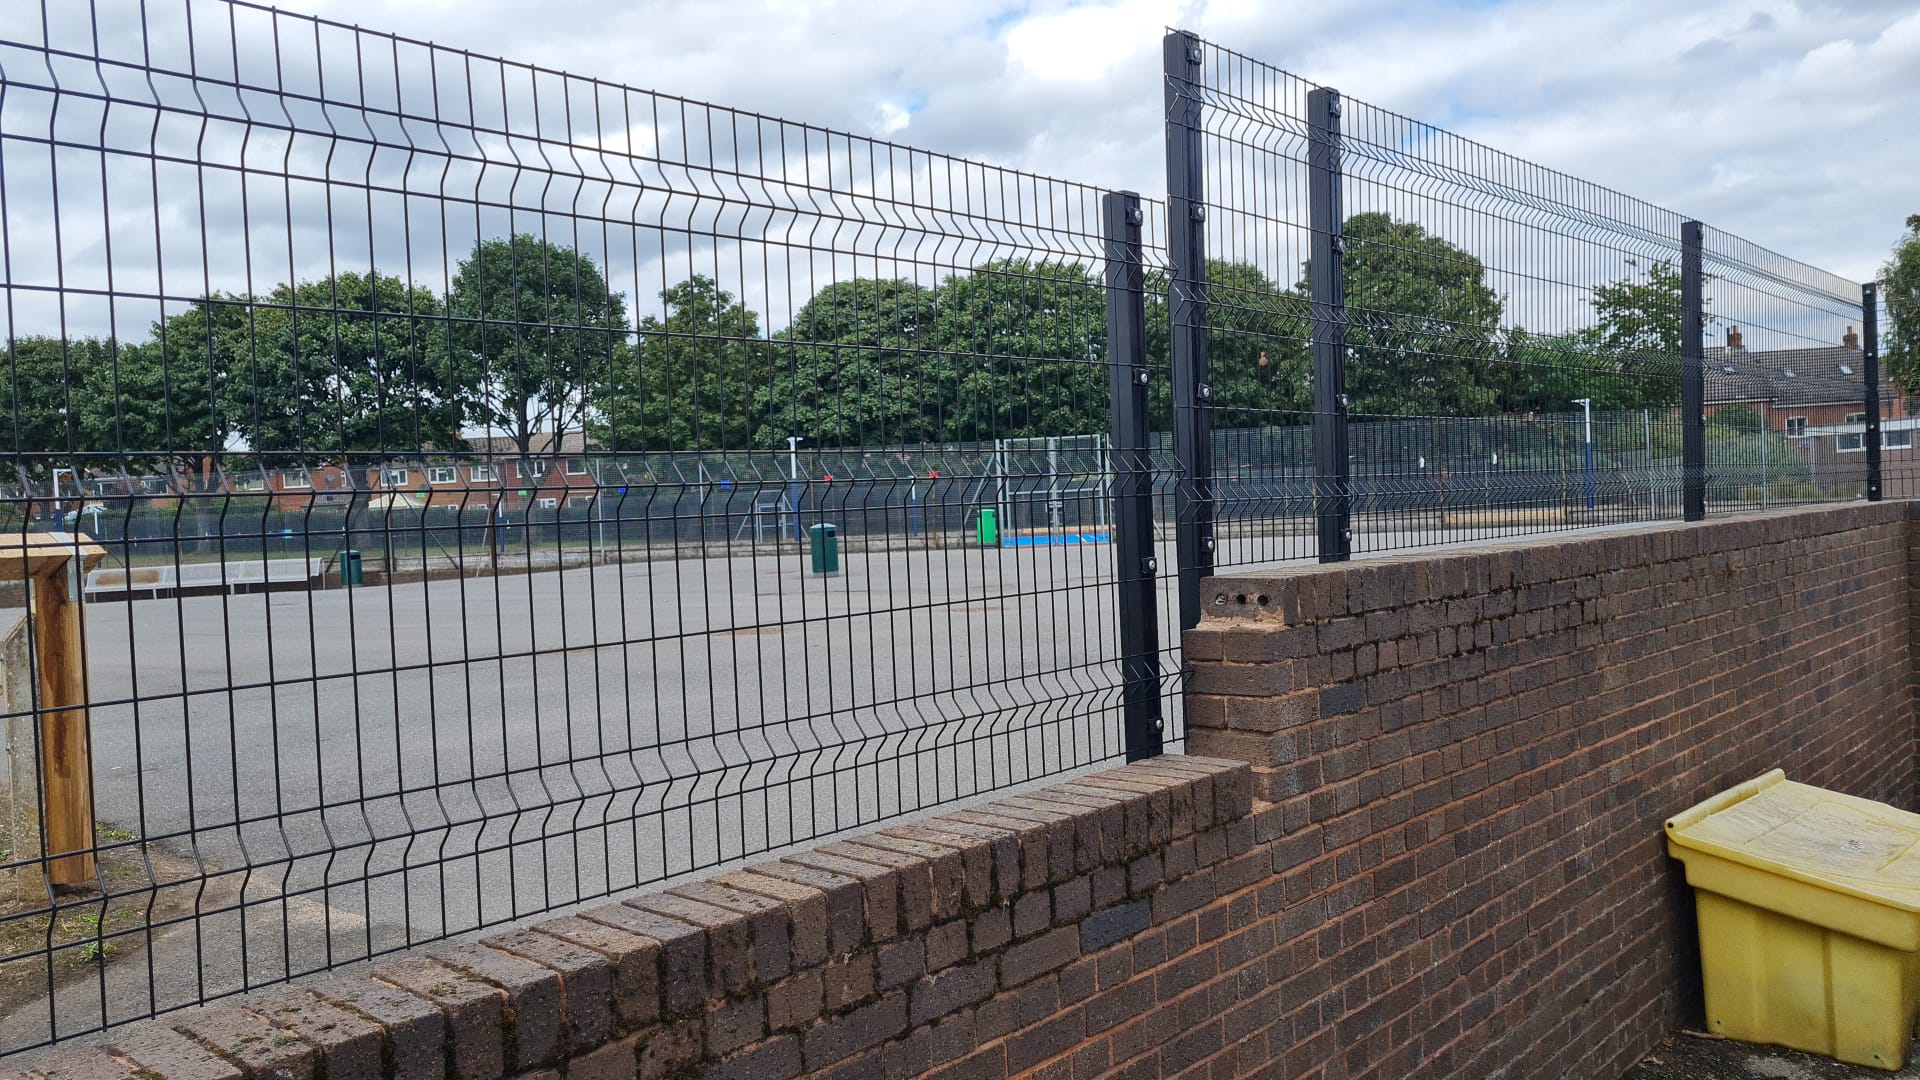 V-Mesh Fencing Supplied at Installed at School in Burntwood, Lichfield